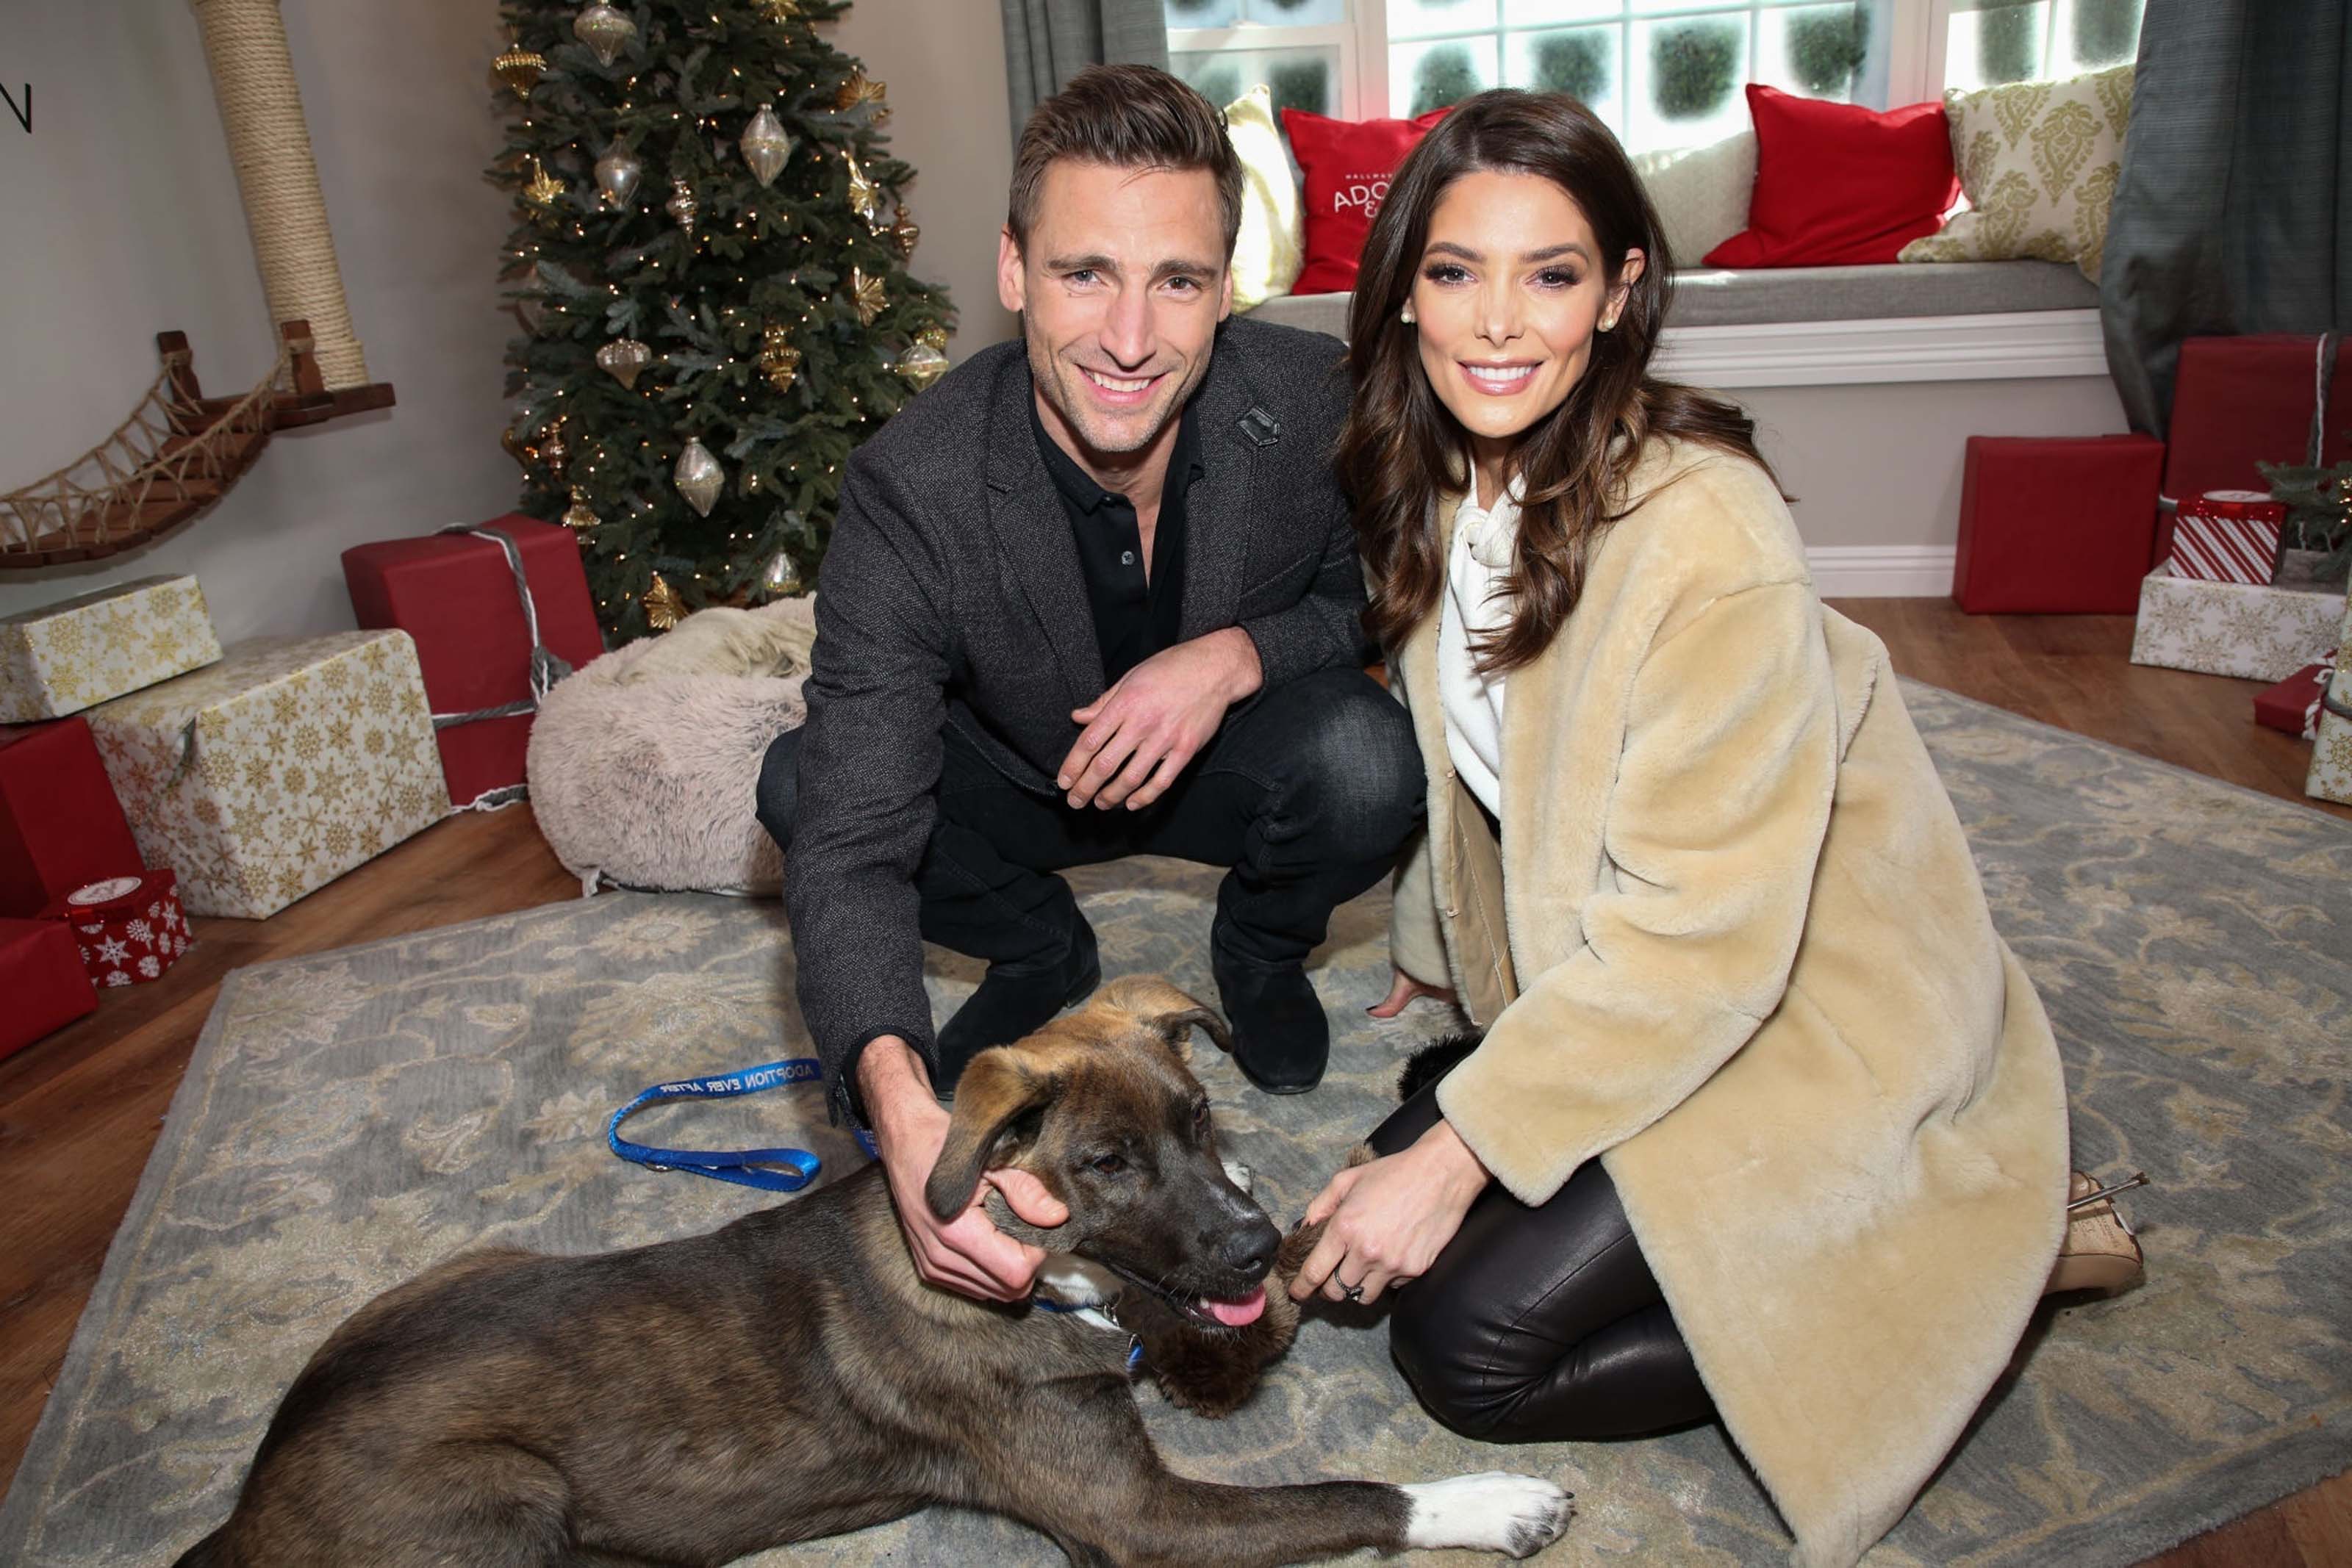 Ashley Greene attends On Hallmark Channel’s ‘Home & Family’